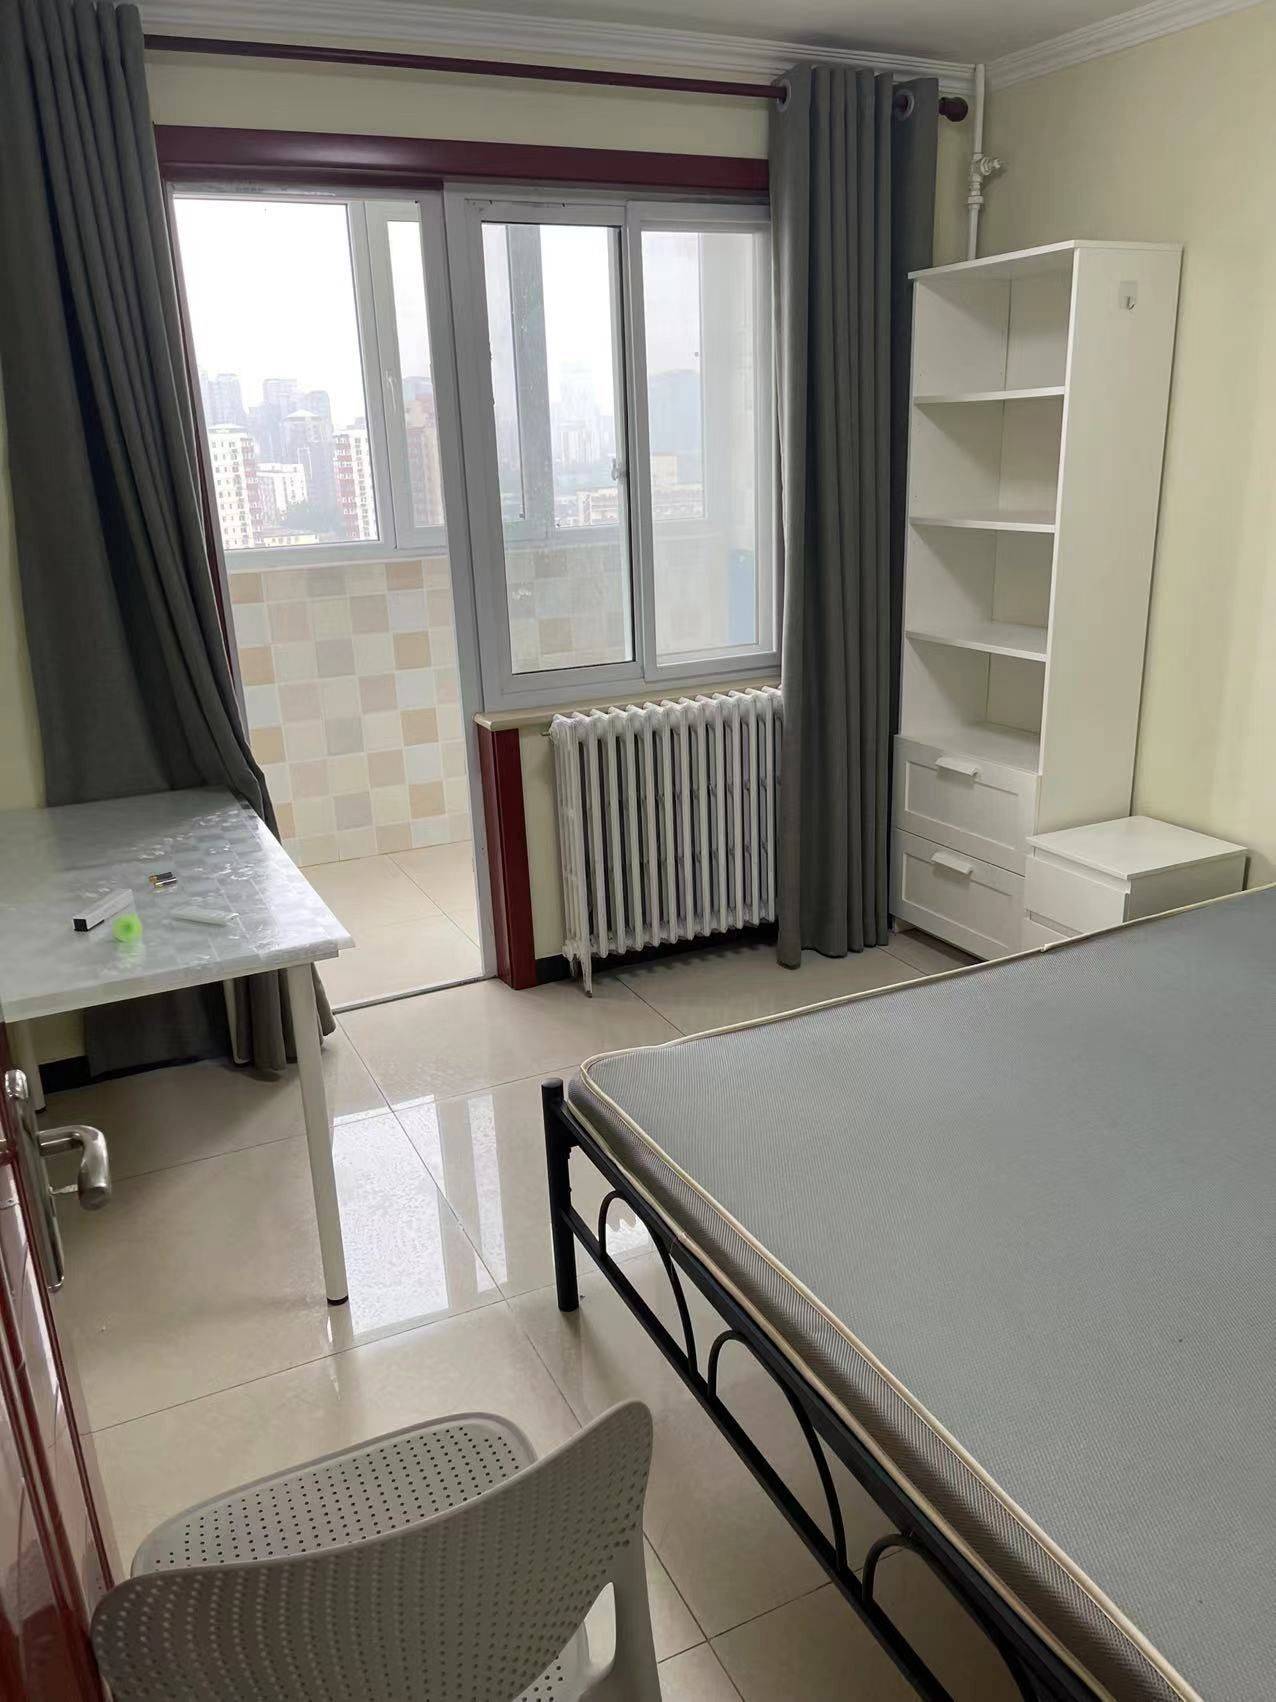 Beijing-Chaoyang-Cozy Home,Clean&Comfy,No Gender Limit,Hustle & Bustle,Chilled,Pet Friendly